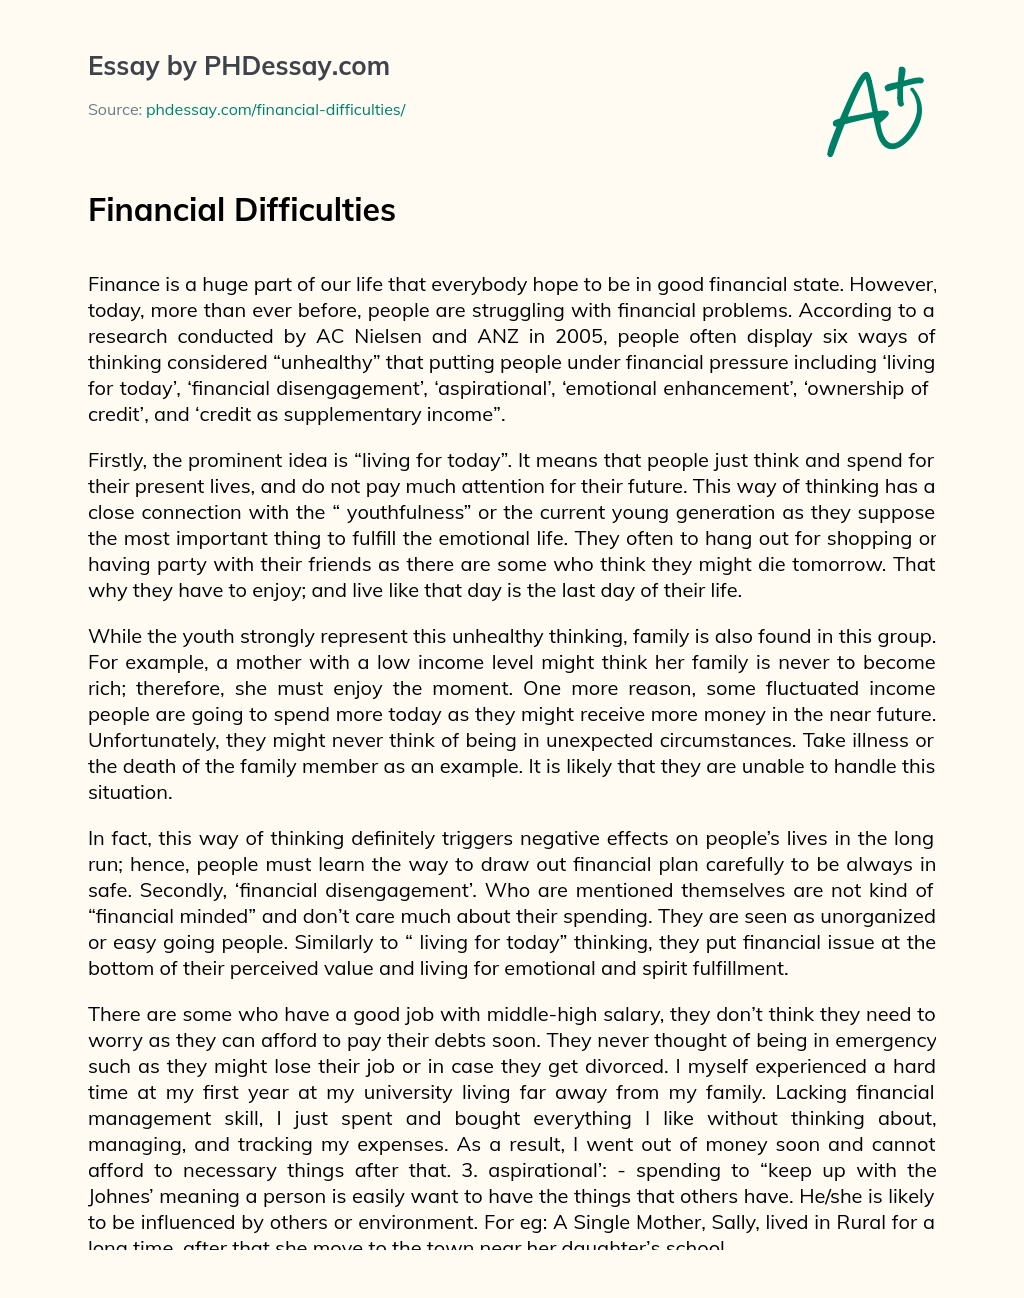 Financial Difficulties essay